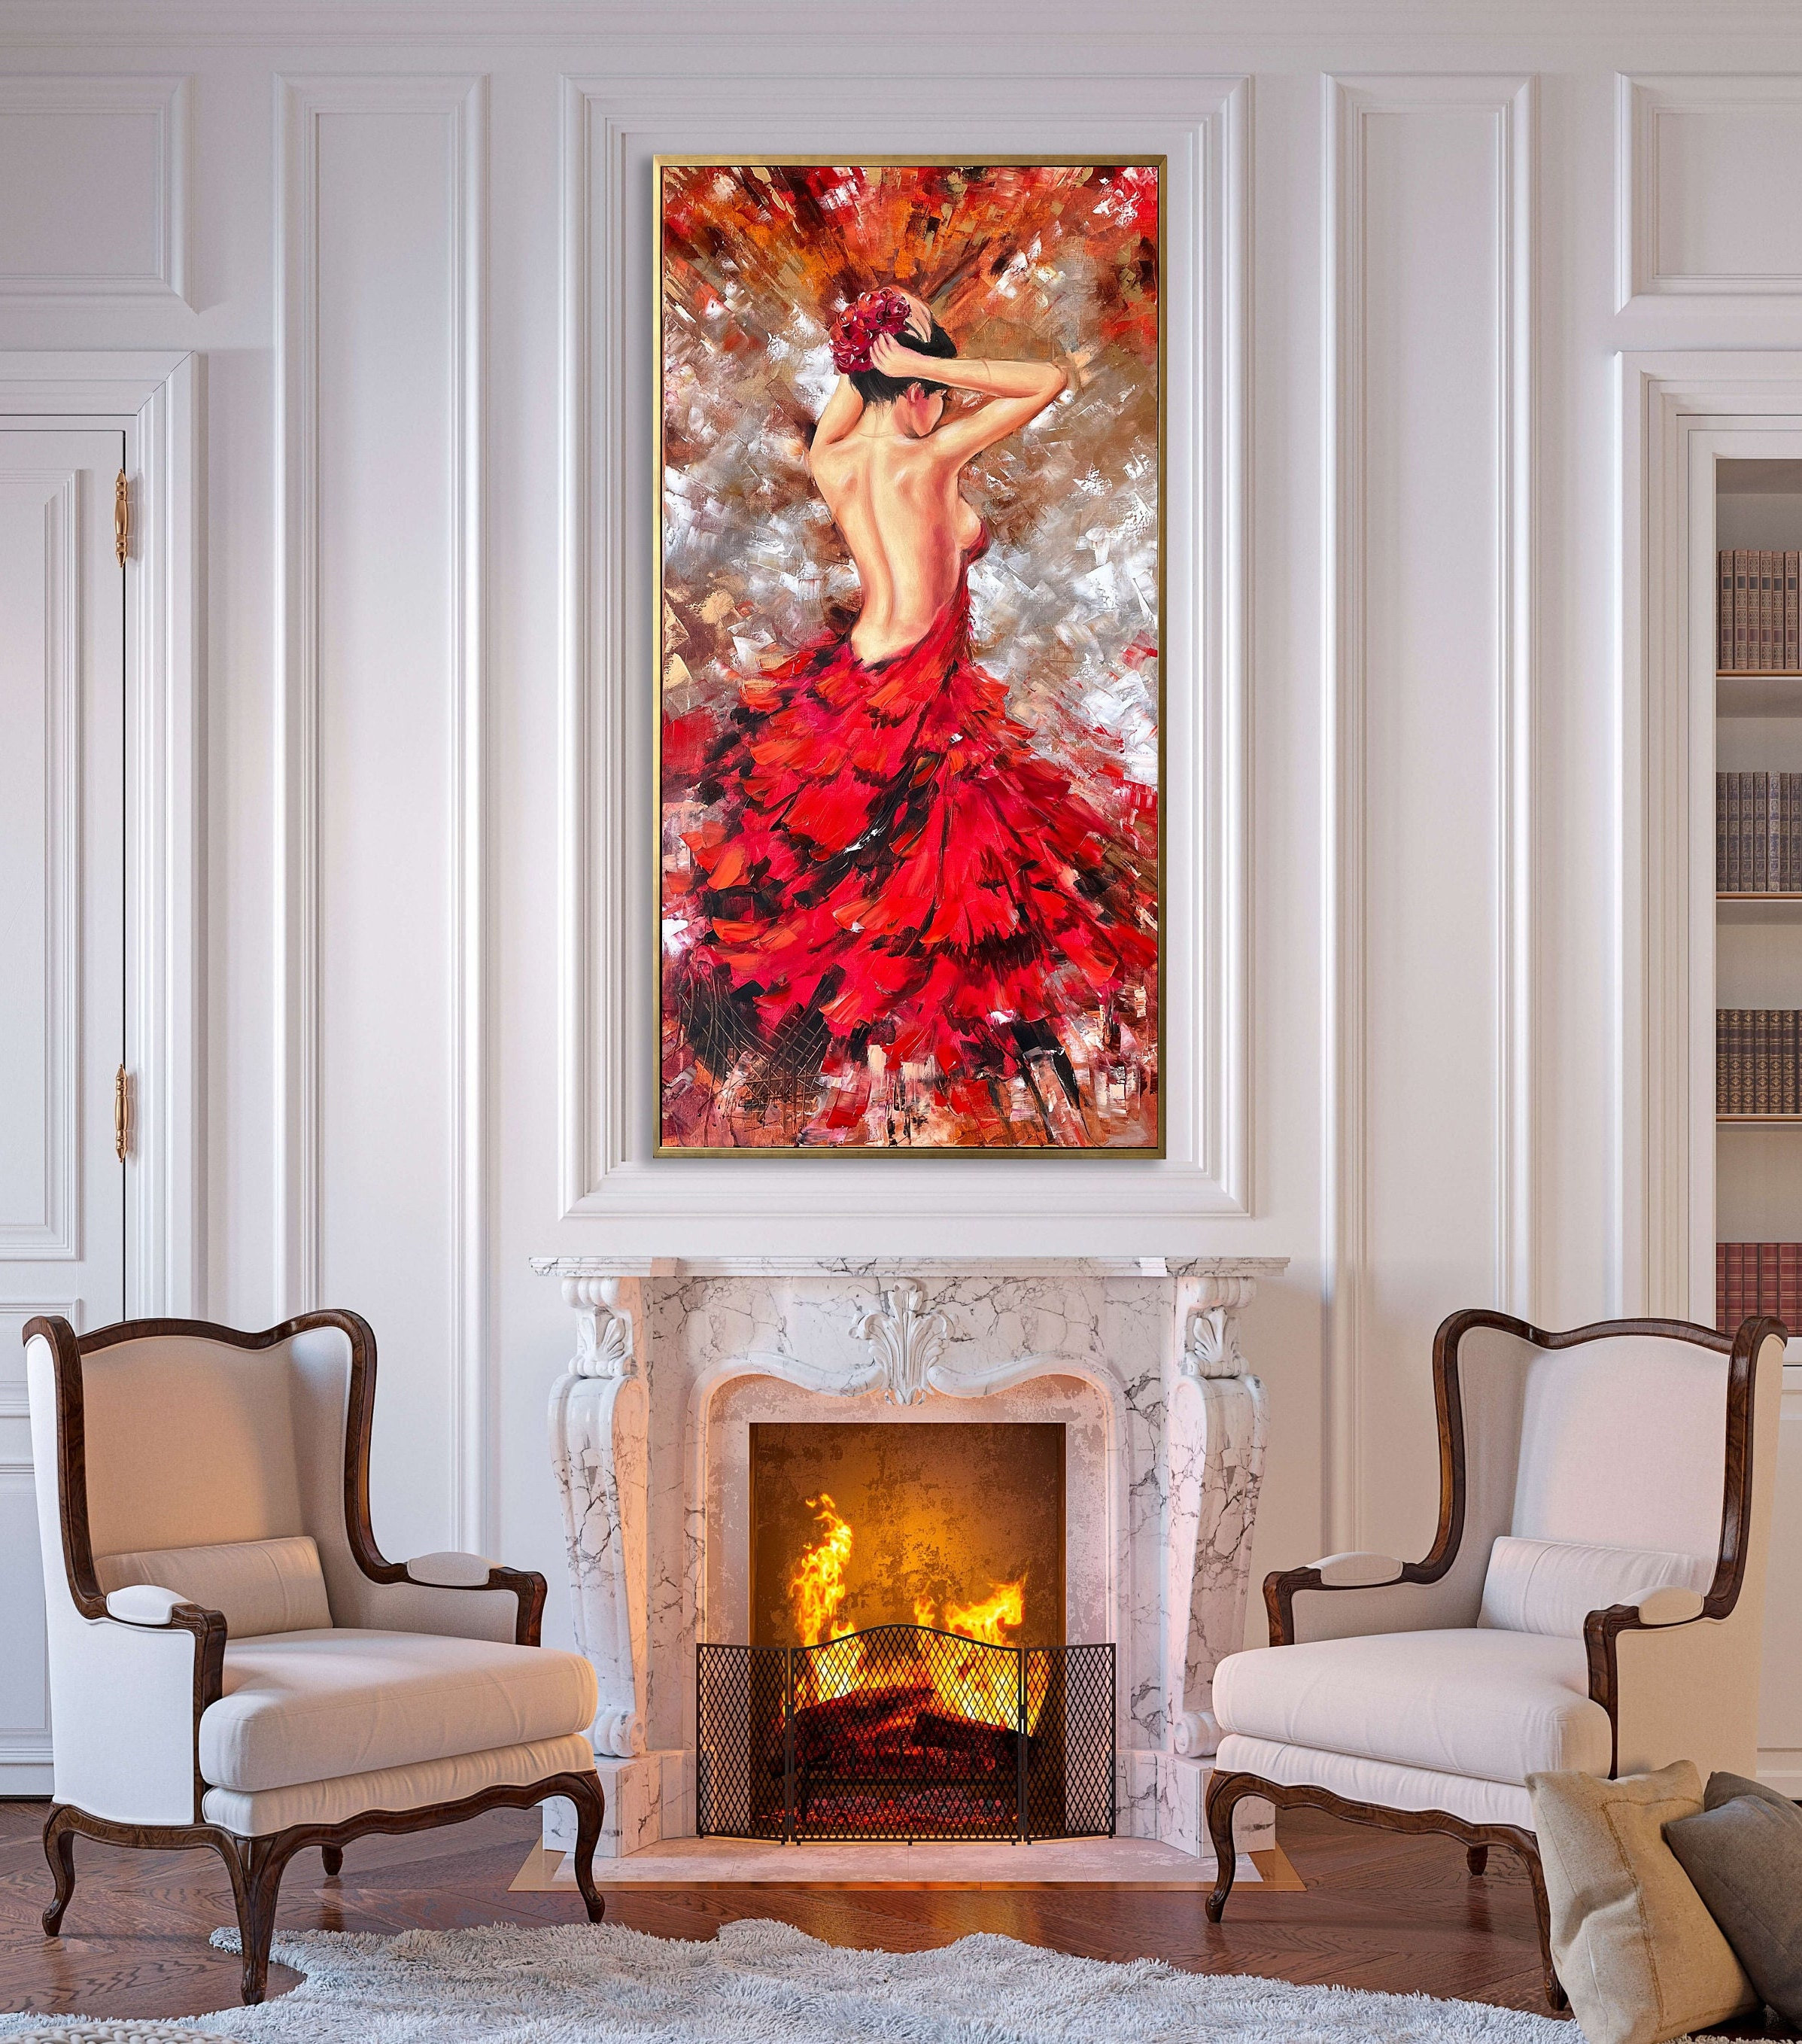 Oversize Vertical Handmade Oil Painting On Canvas Red White Modern